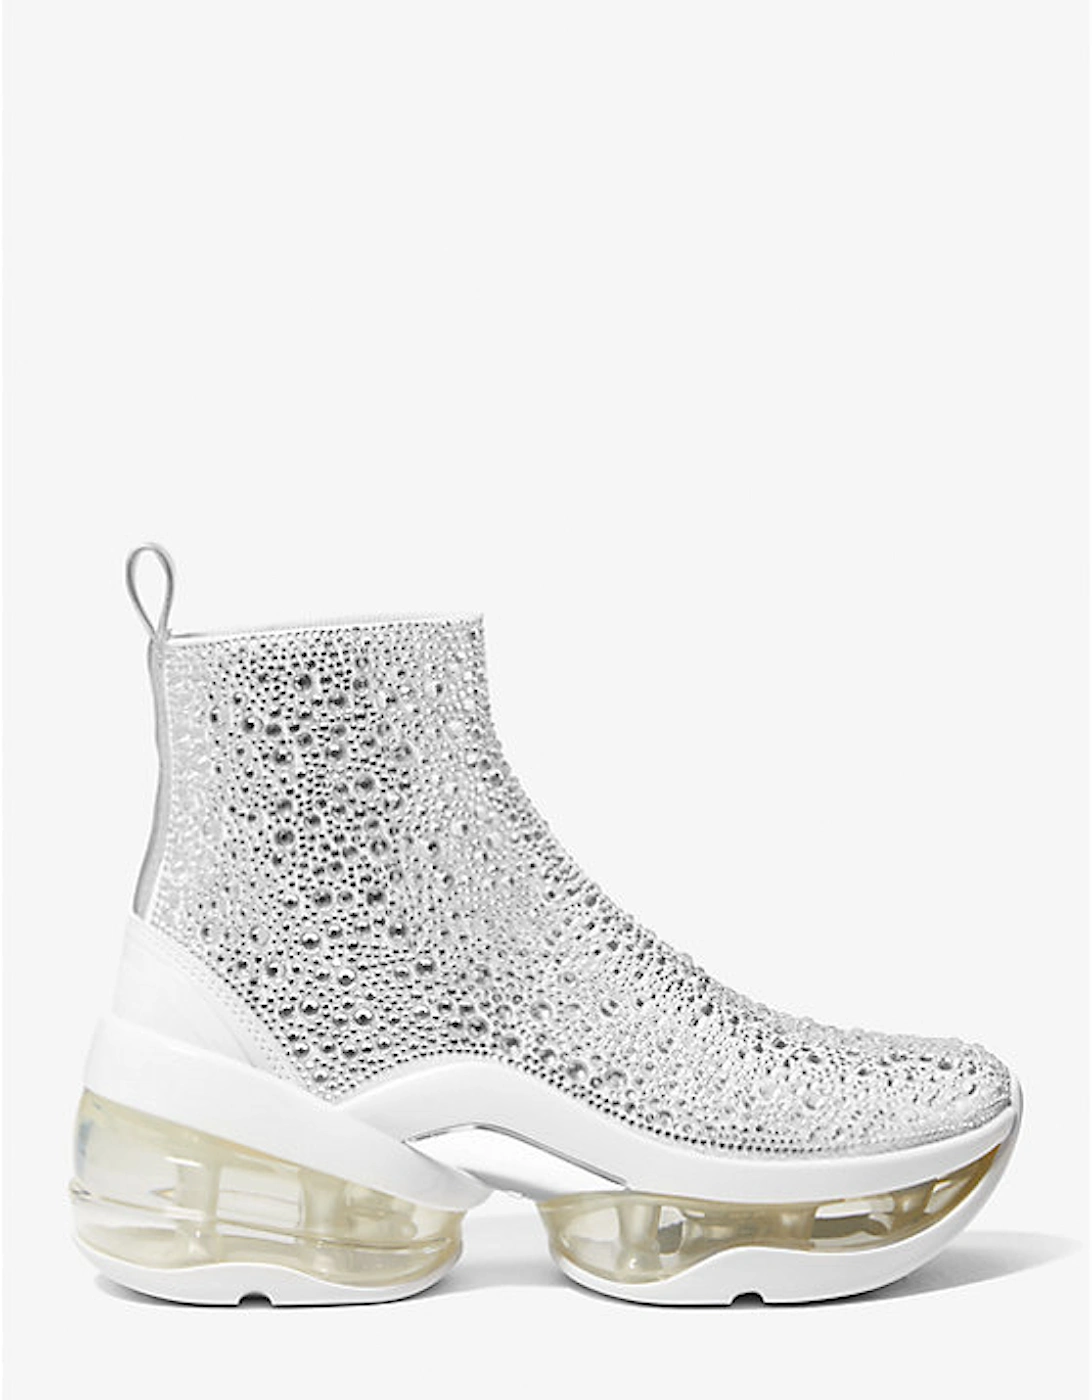 Olympia Extreme Embellished Knit Sock Sneaker